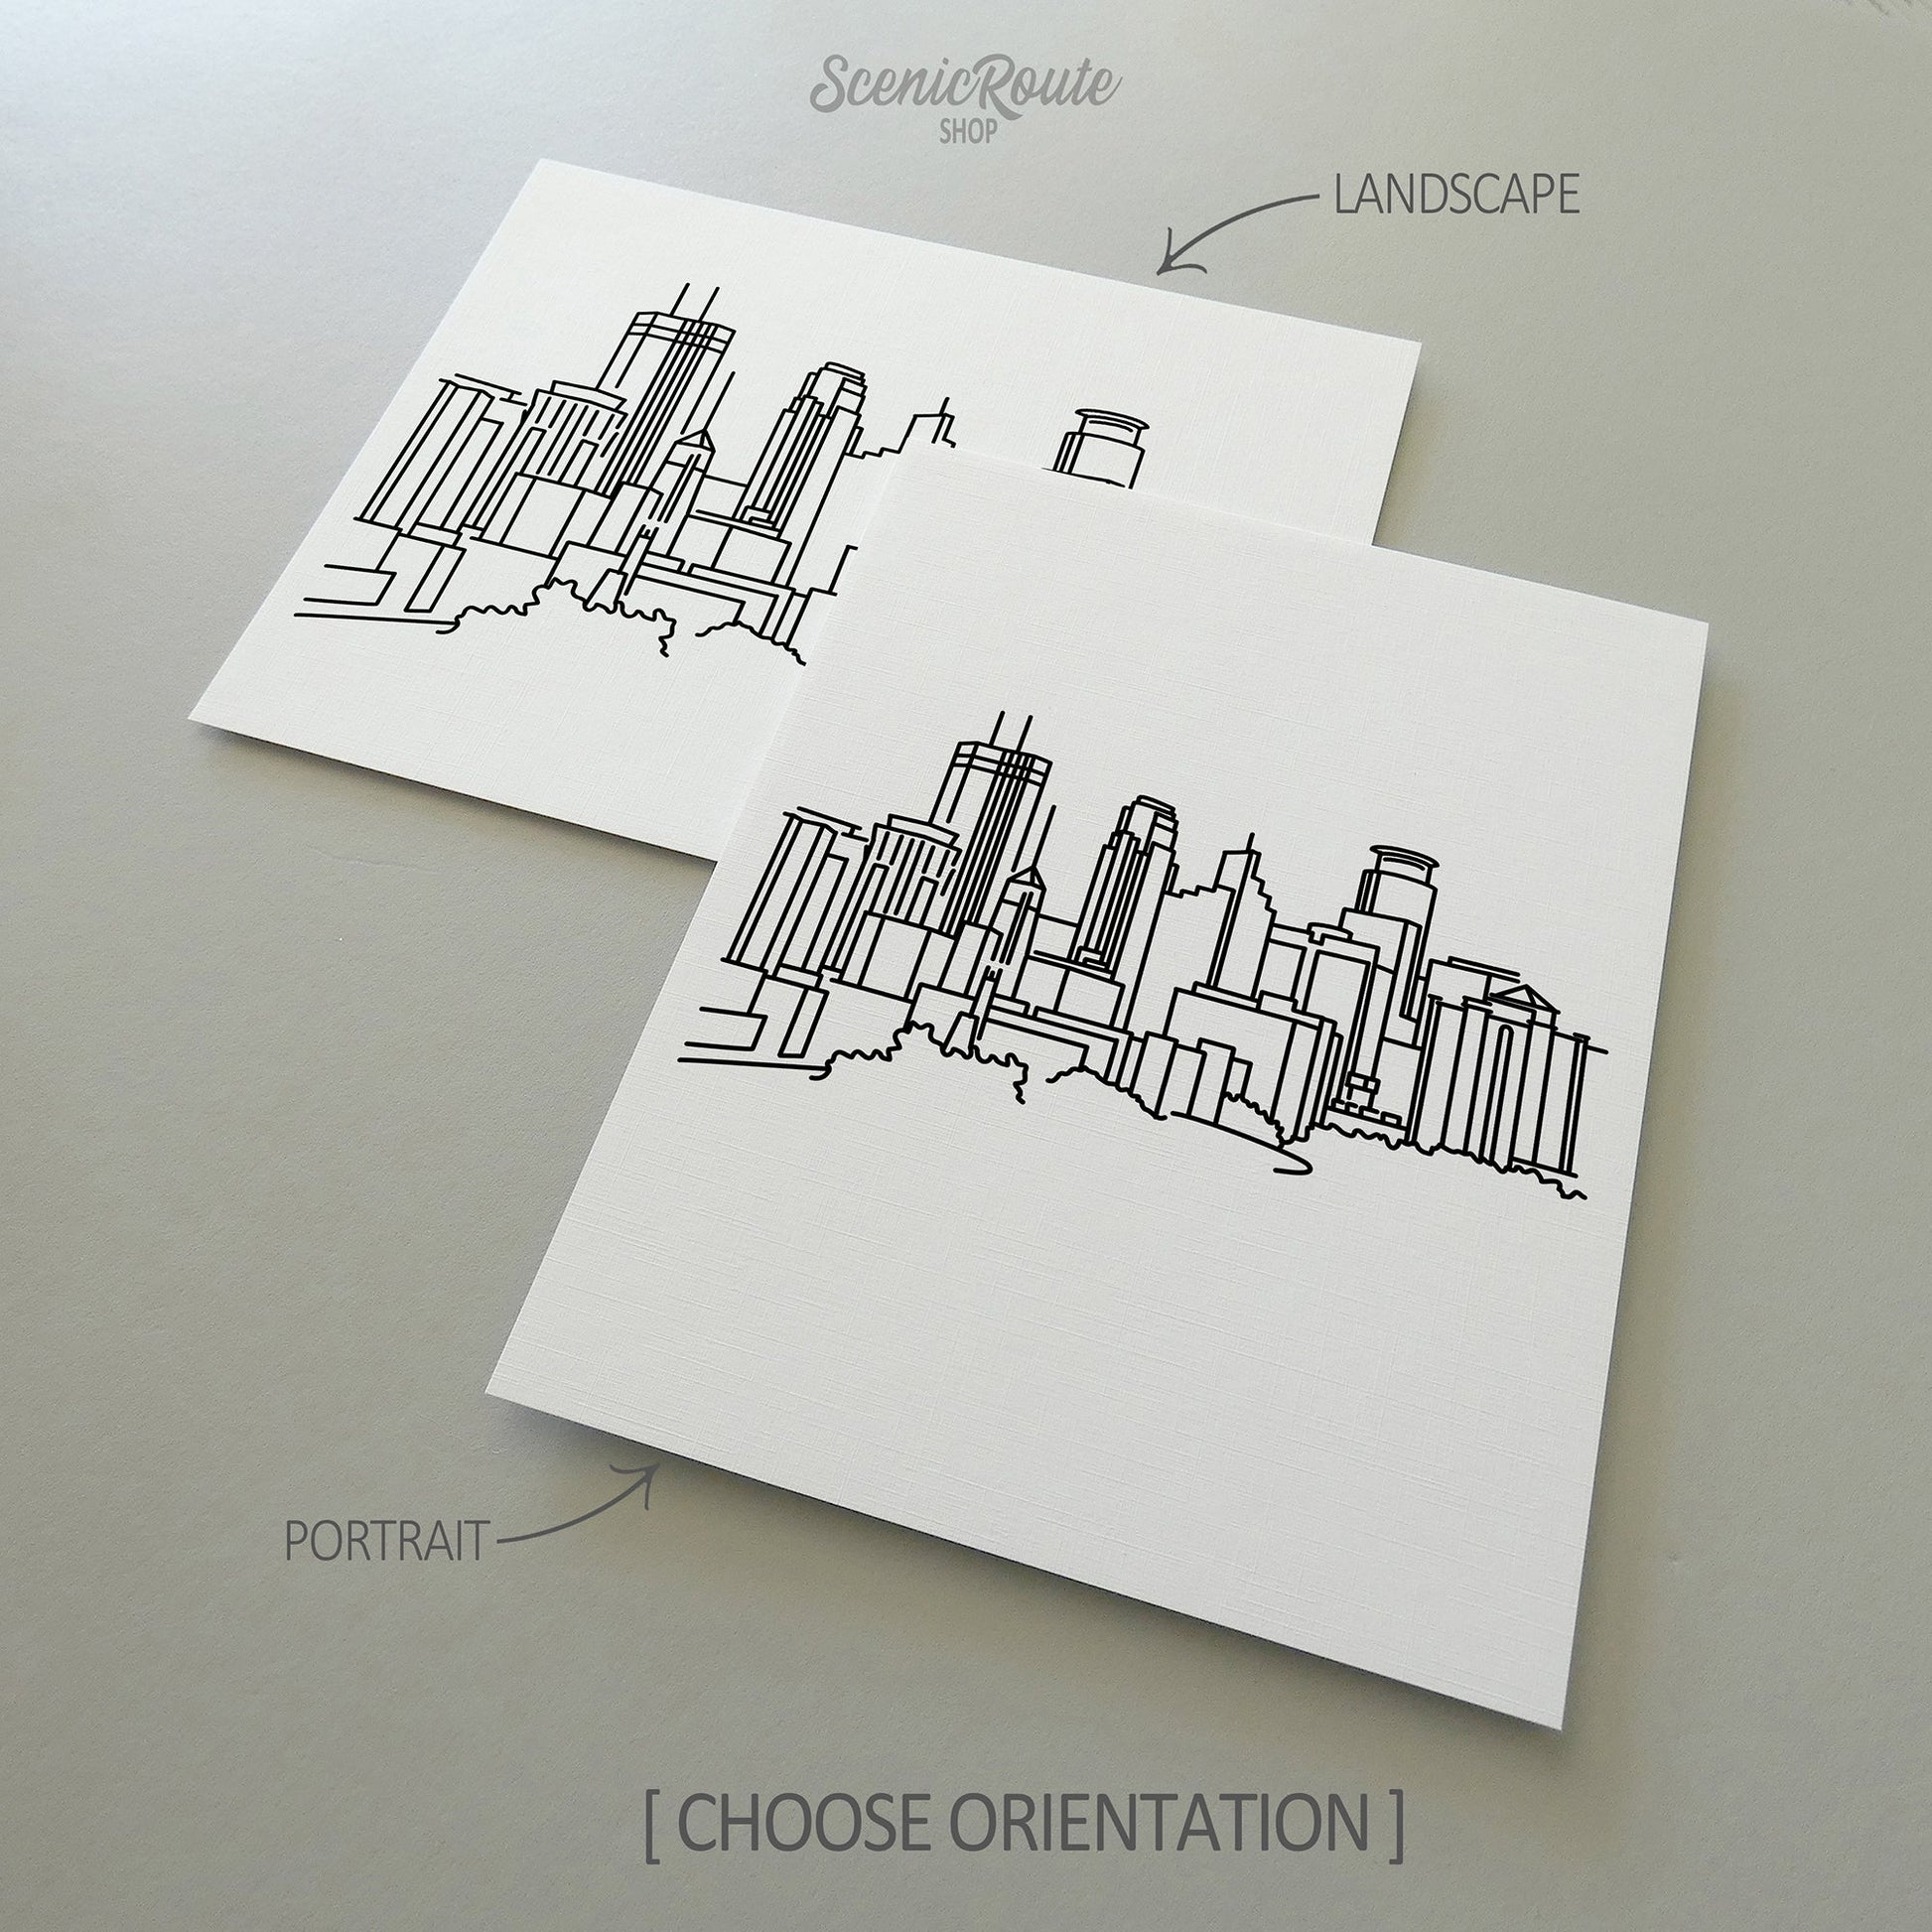 Two line art drawings of the Minneapolis Skyline on white linen paper with a gray background.  The pieces are shown in portrait and landscape orientation for the available art print options.